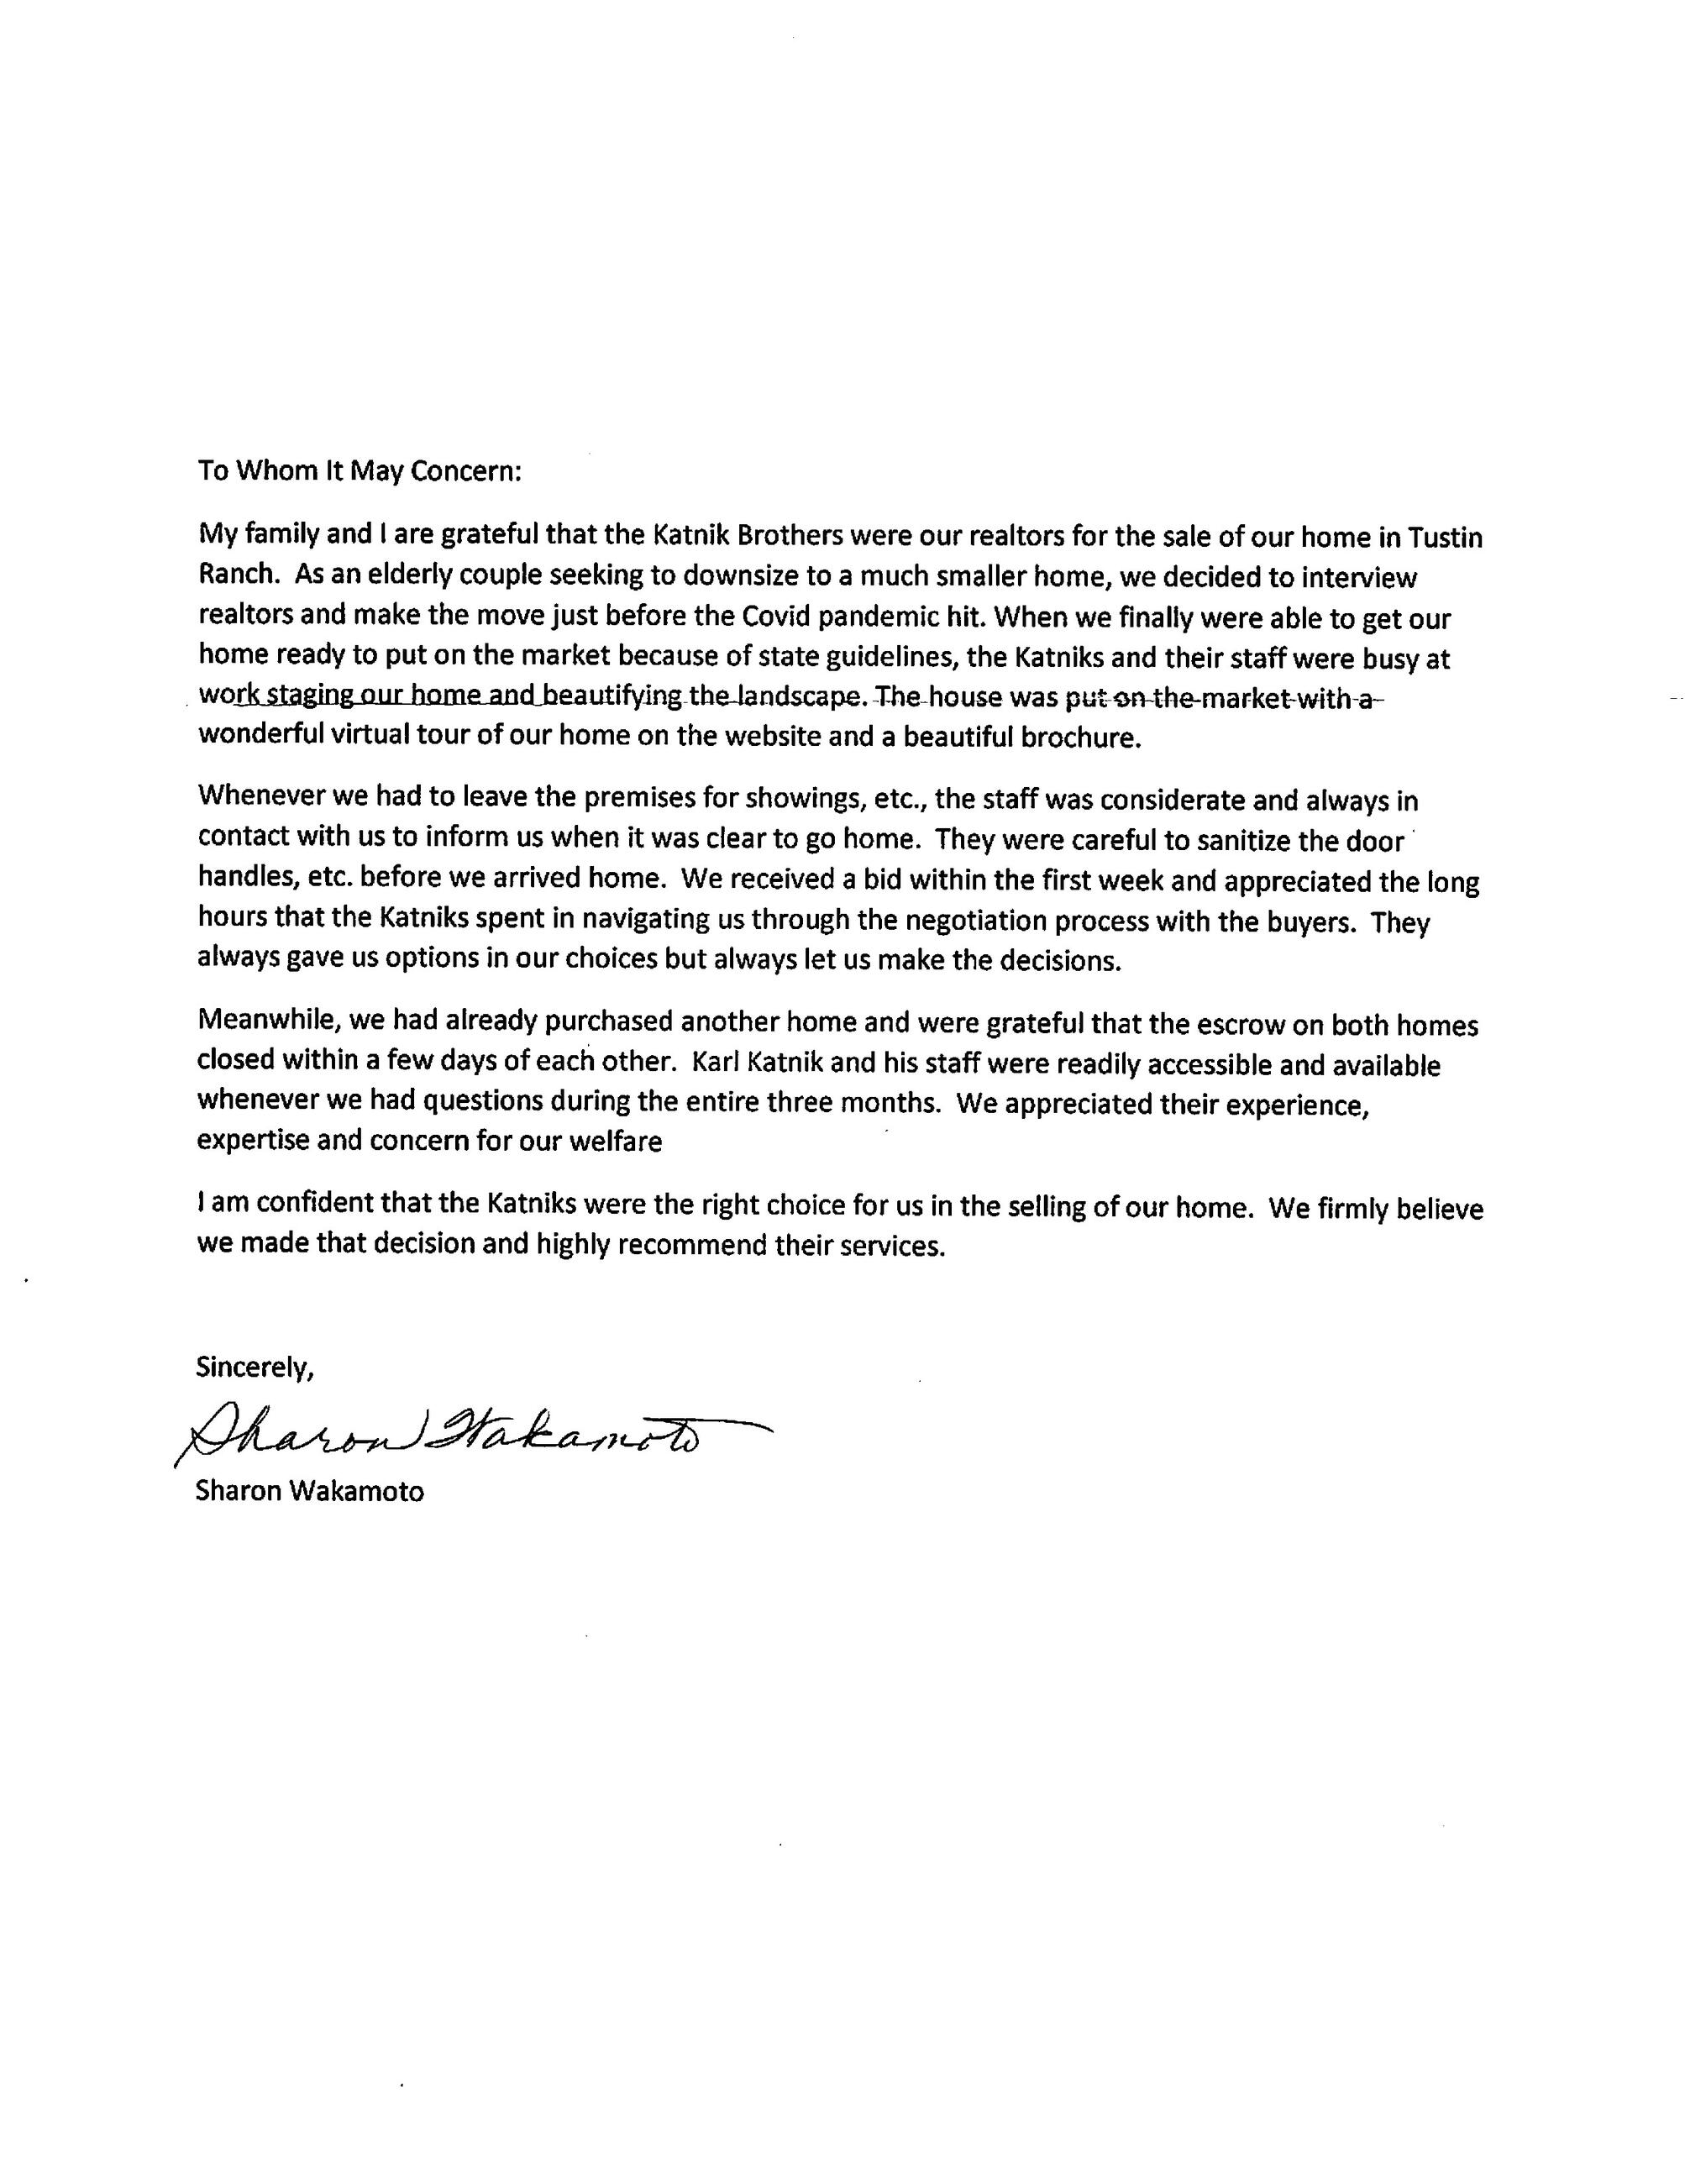 Sharon Wakamoto Letter of Recommendation